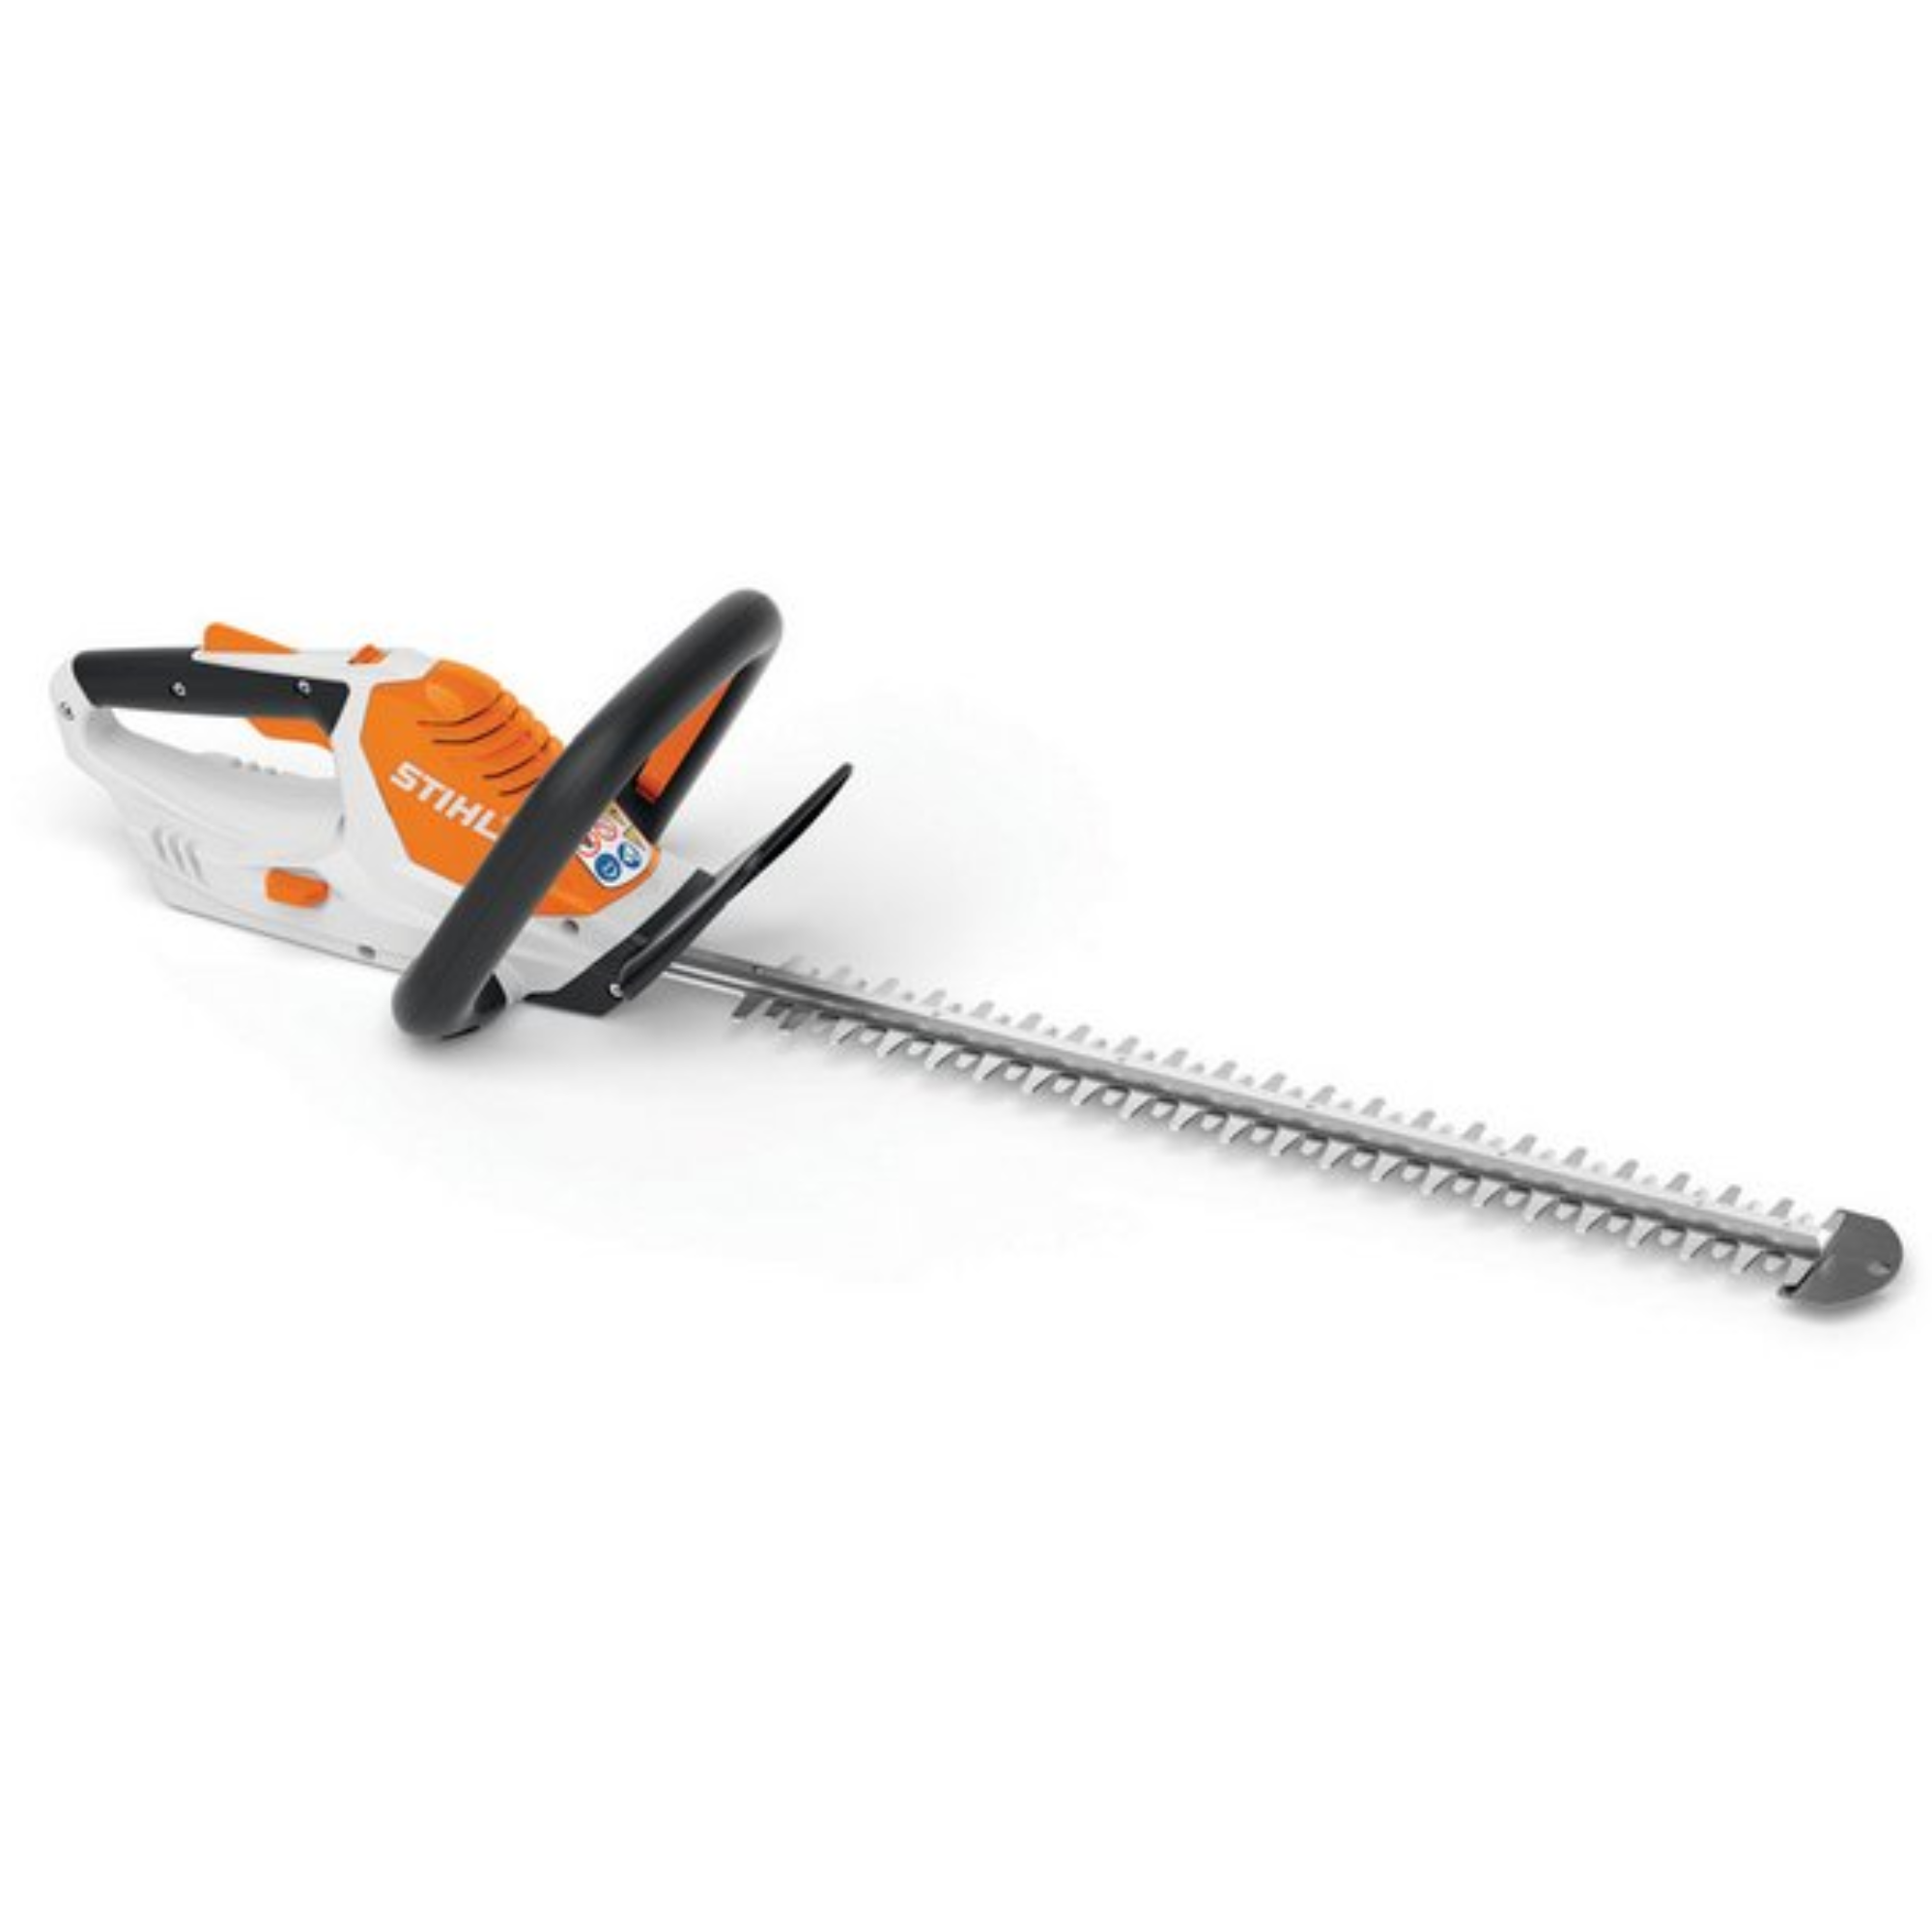 Stihl HSA 45 Battery Powered Hedge Trimmer